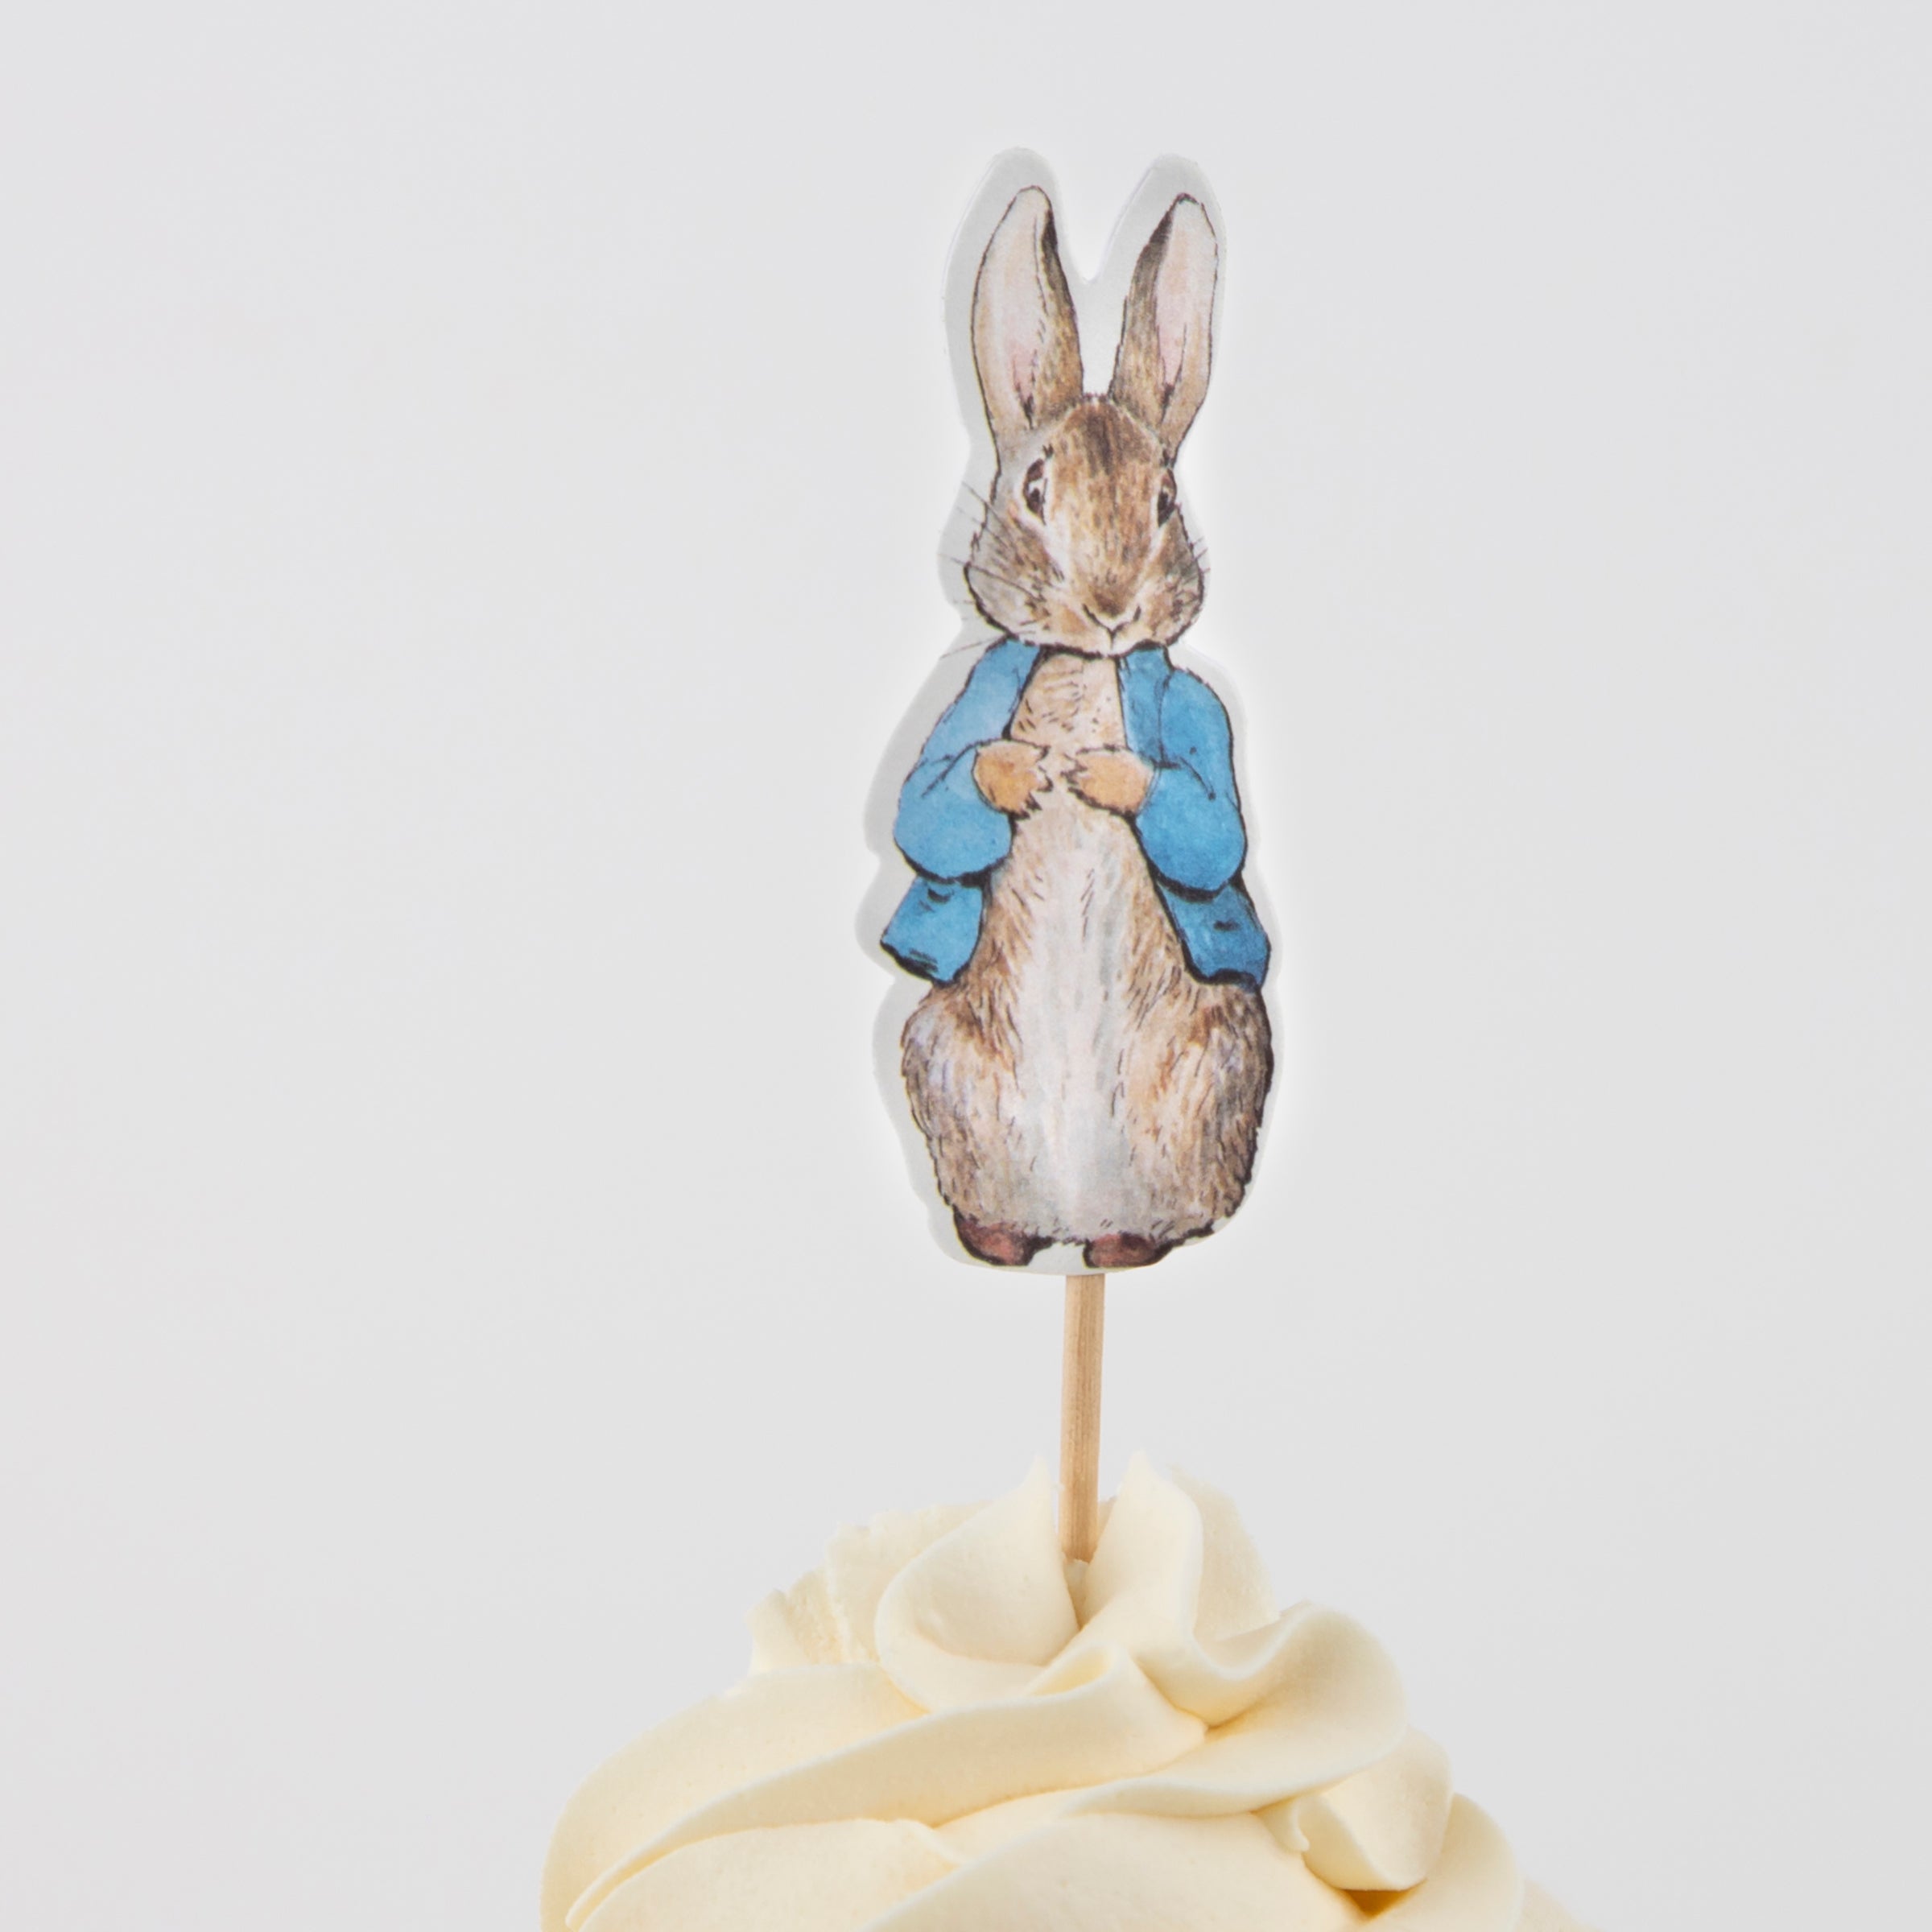 Our cupcake decorating kit includes Peter Rabbit and frienda cupcake toppers and green gingham cupcake cases.